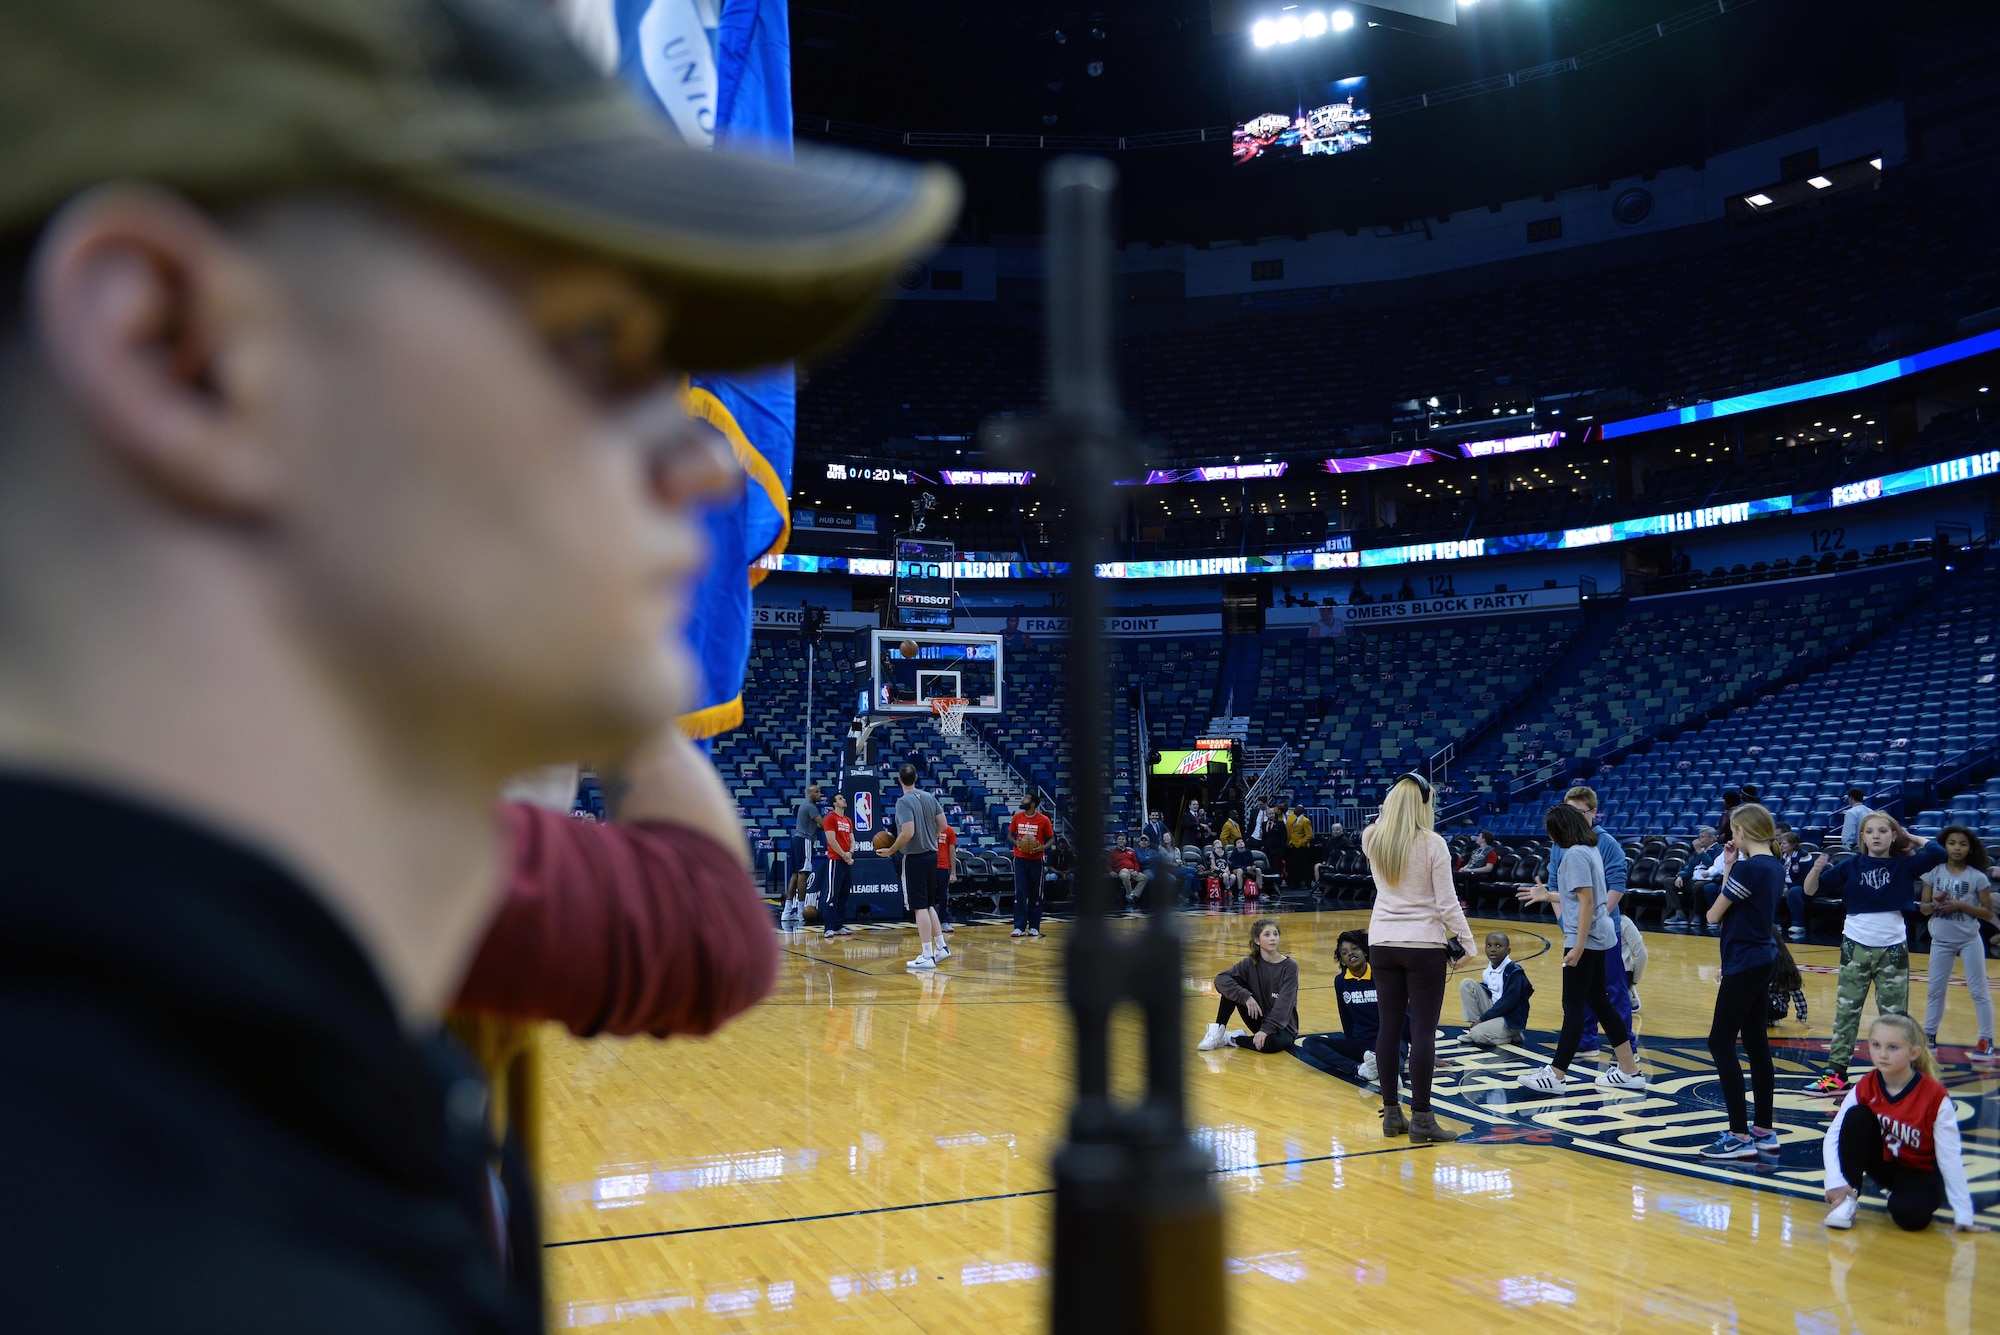 Members of the New Orleans Pelicans, a local dance troupe and the Keesler Honor Guard practice their respective routines during pregame warmups before a New Orleans Pelicans NBA game at the Smoothie King Center, March 3, 2017, in New Orleans. The Keesler Honor Guard posted the colors prior to the game. The Keesler Honor Guard performs hundreds of ceremonial details across Louisiana and Mississippi each year, including funerals, ceremonies, sporting events and parades. (U.S. Air Force photo by Senior Airman Duncan McElroy)